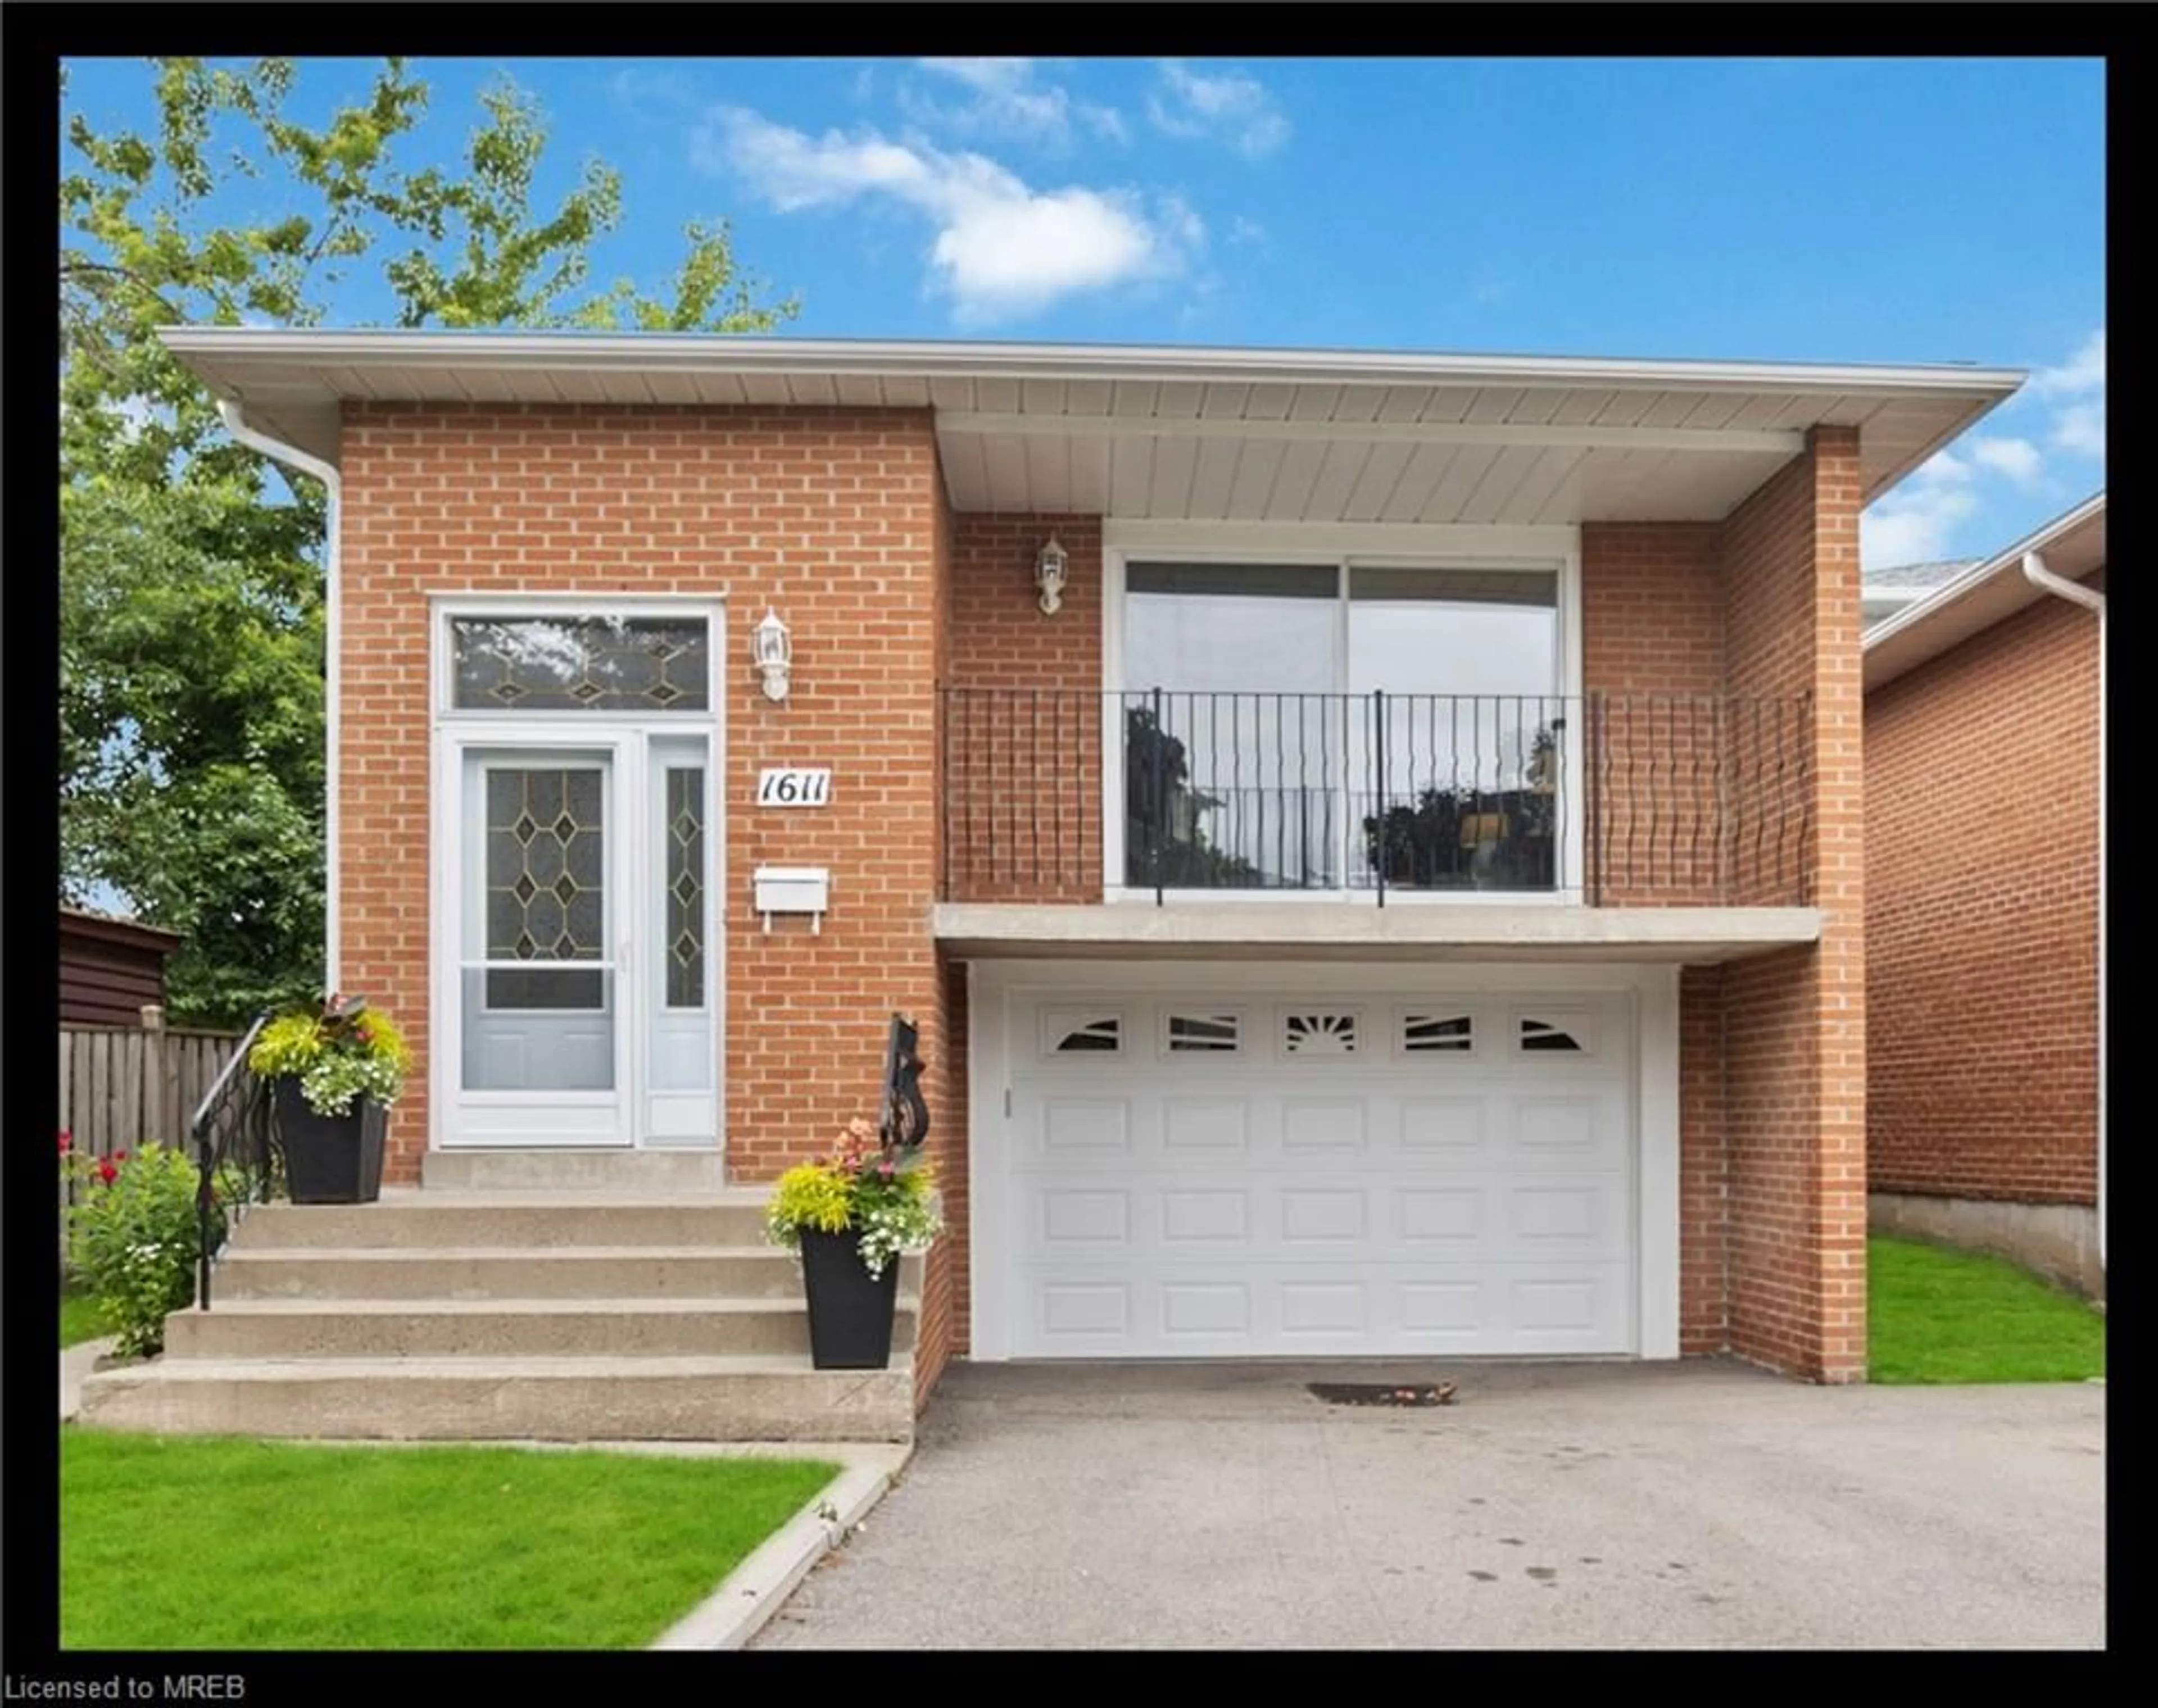 Home with brick exterior material for 1611 Lewes Way, Mississauga Ontario L4W 3H5